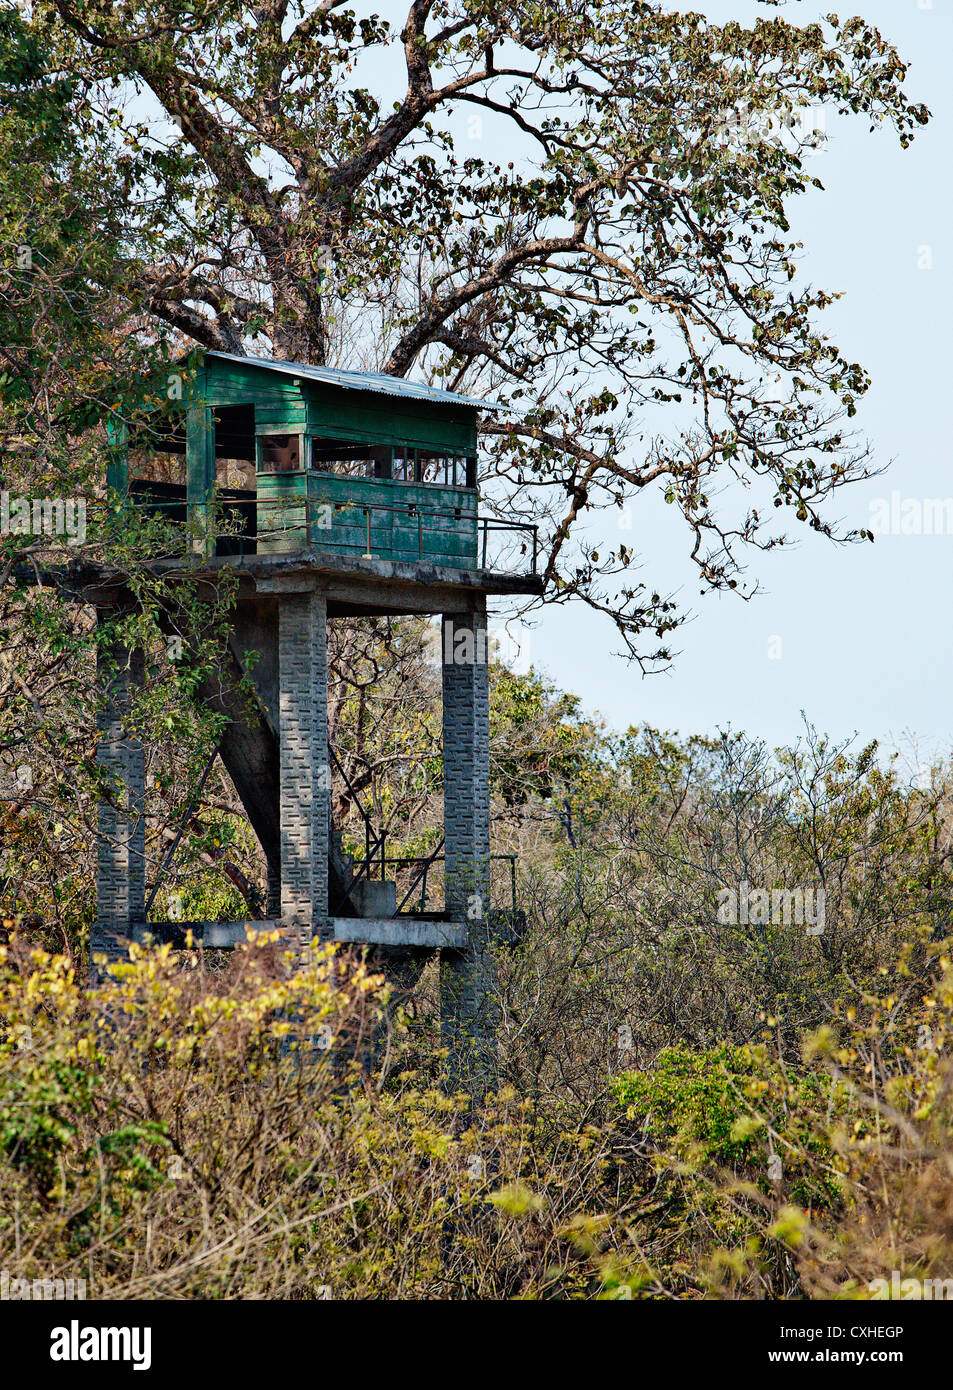 Watchtower for wildlife viewing in Dhikala area in Jim Corbett Tiger Reserve, India. Stock Photo